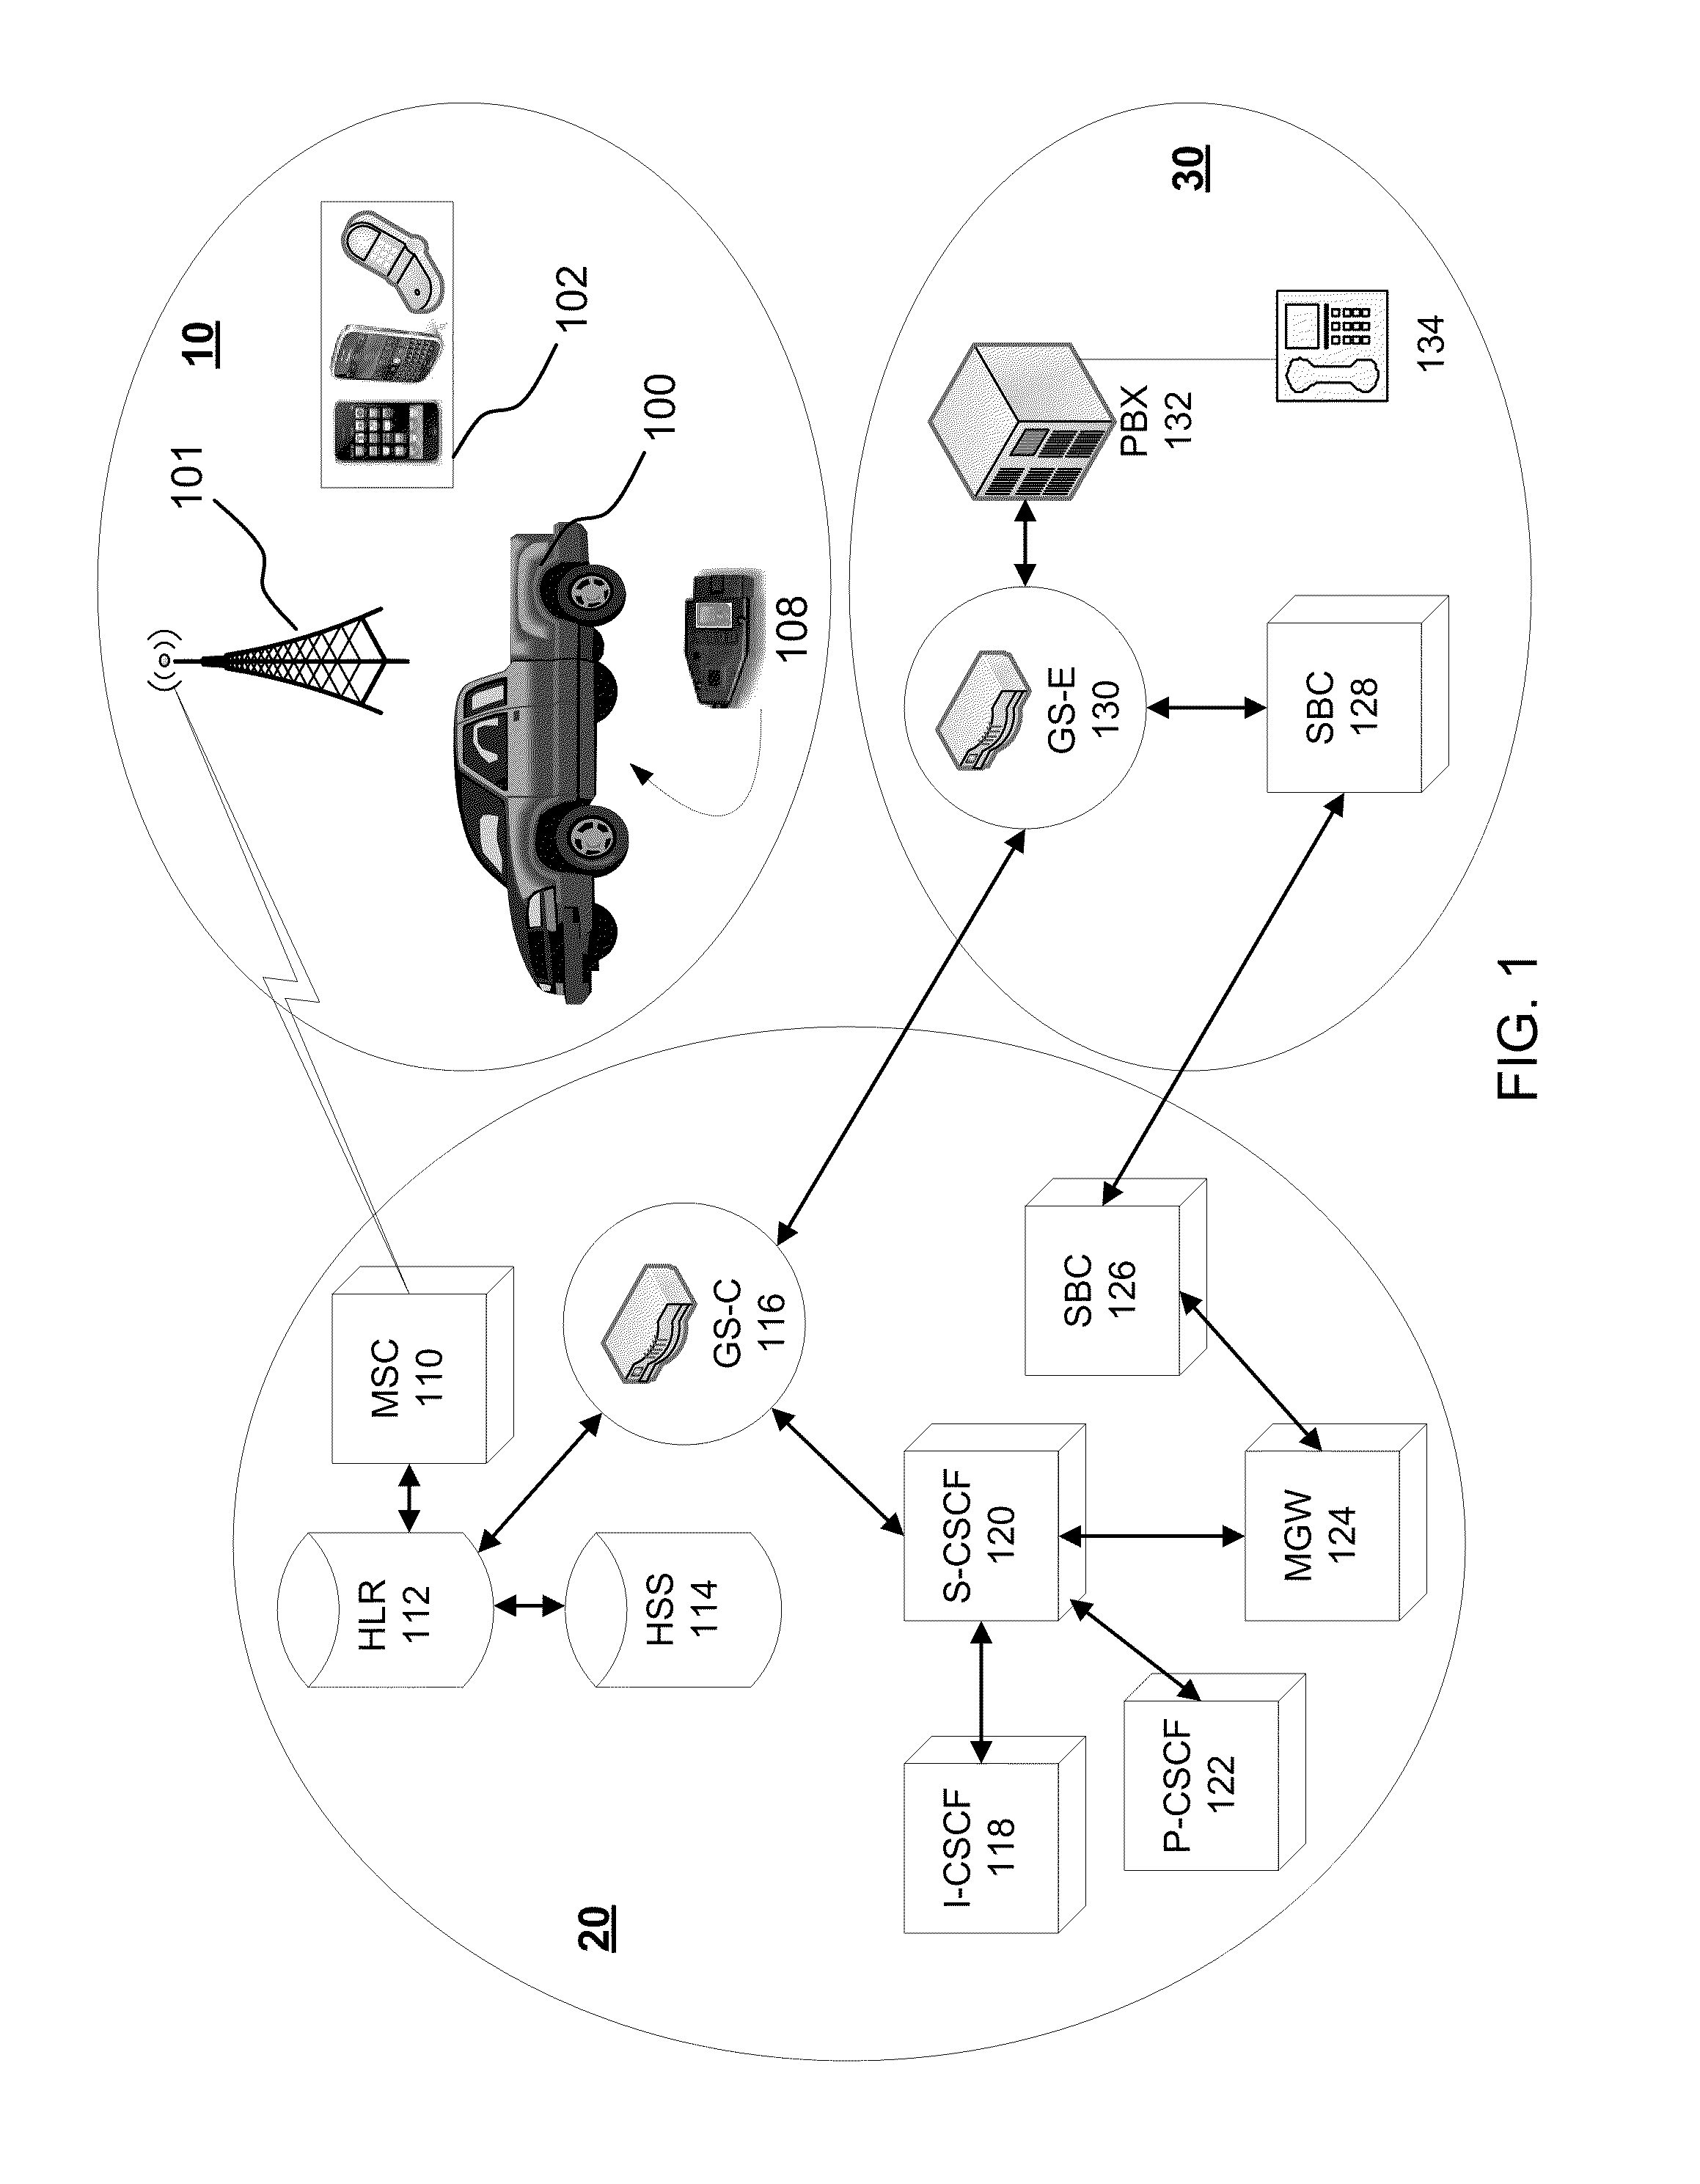 Controlling mobile device calls, text messages and data usage while operating a motor vehicle